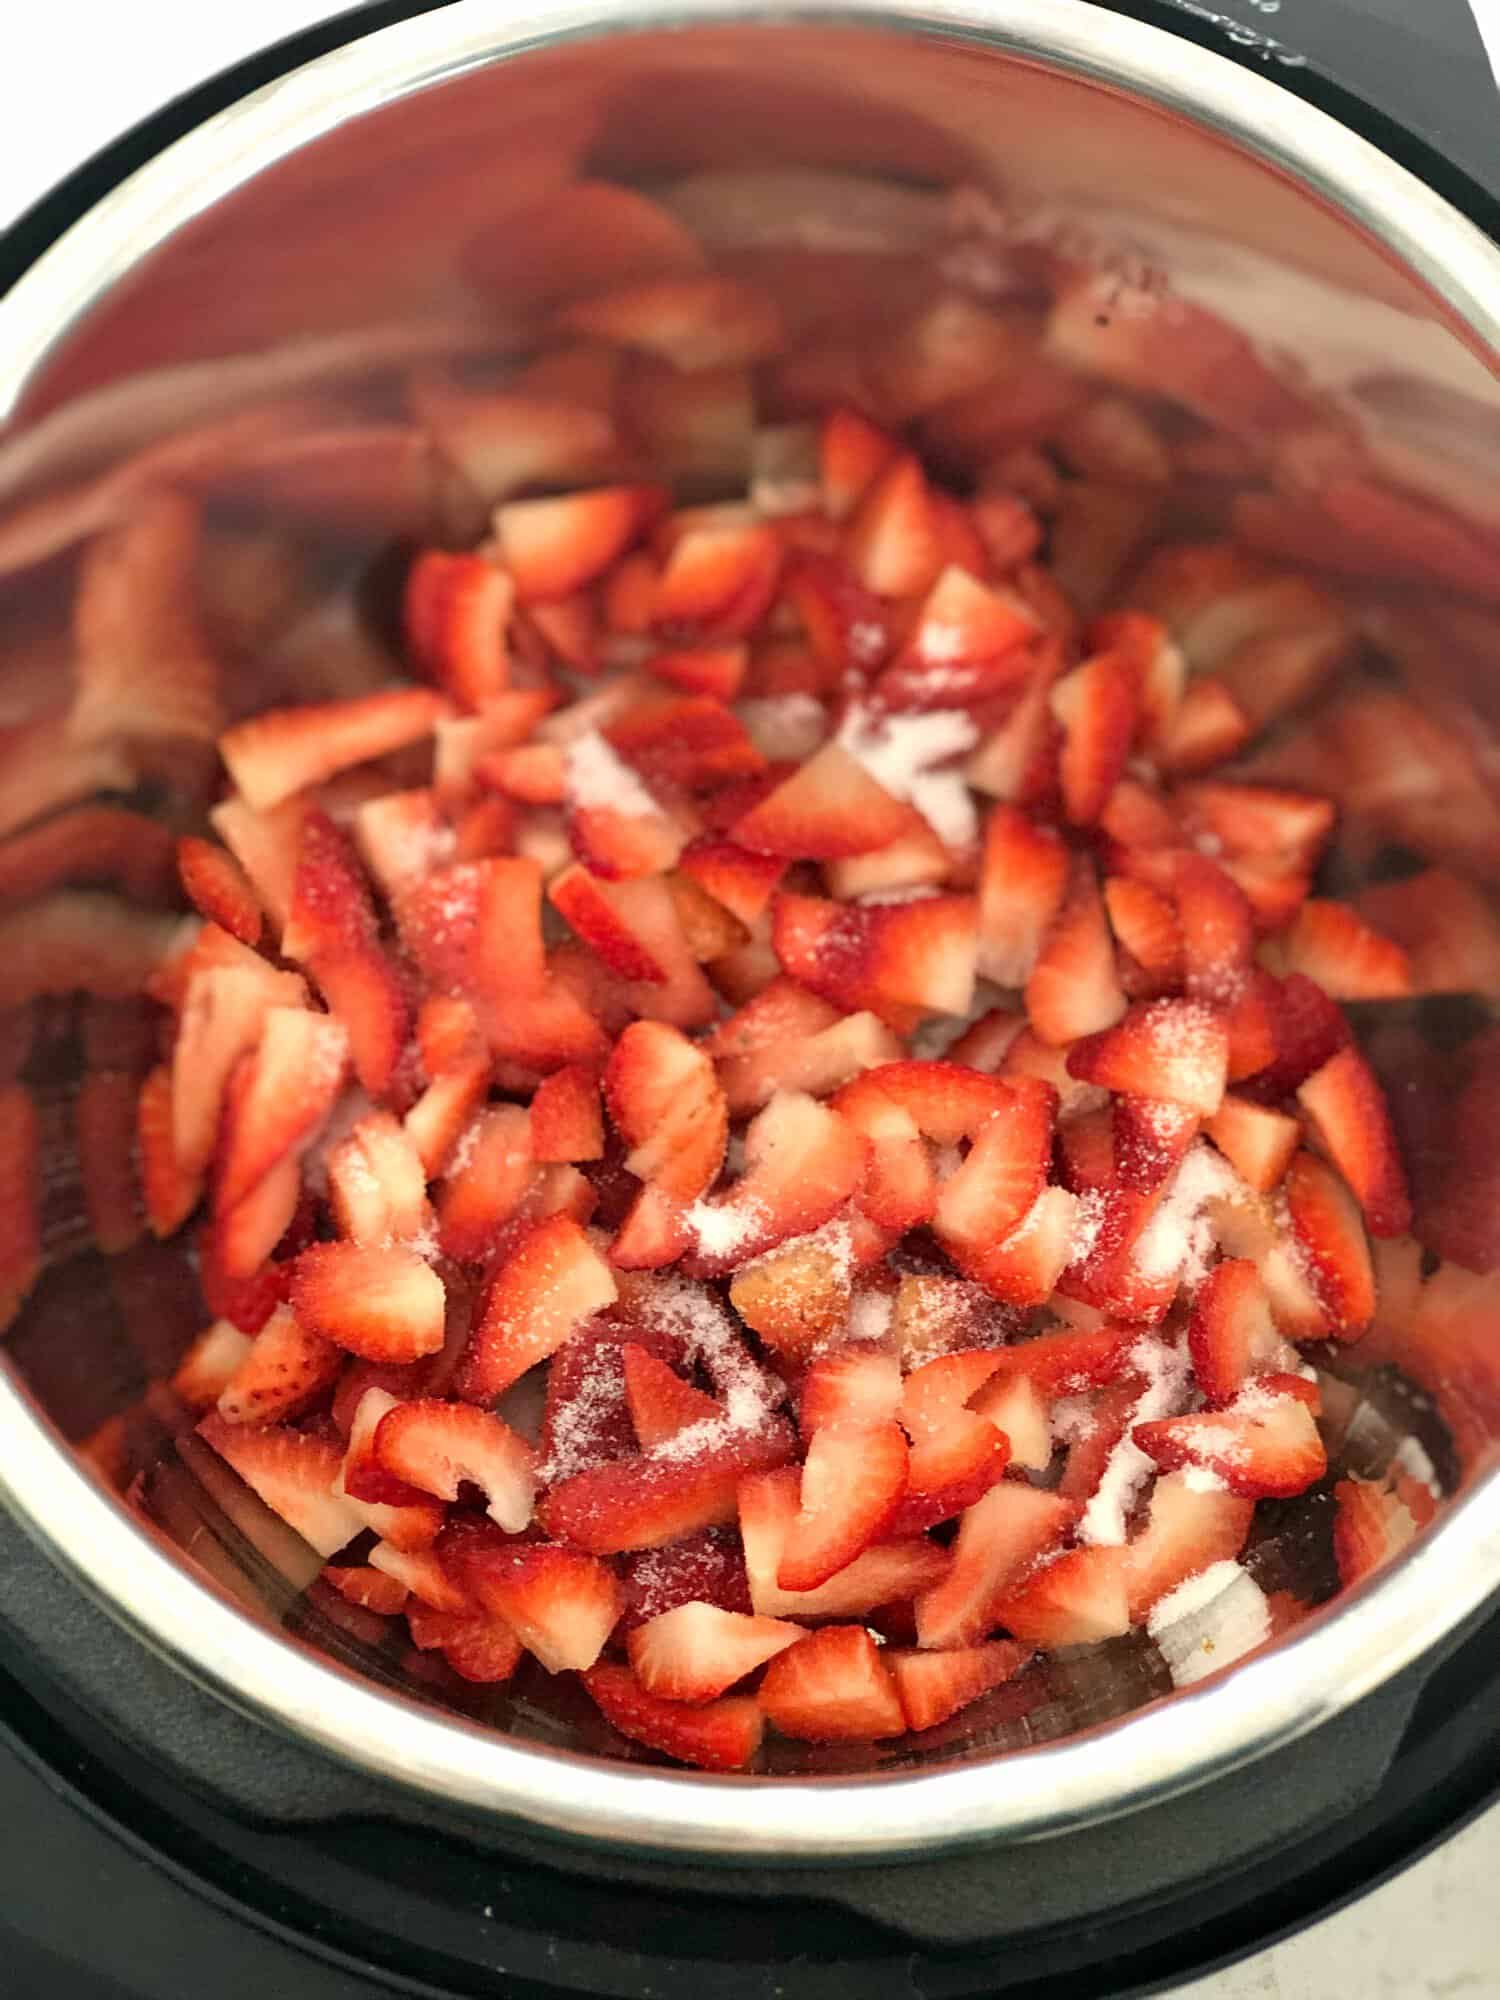 Diced strawberries in the instant pot with sugar sprinkled on top